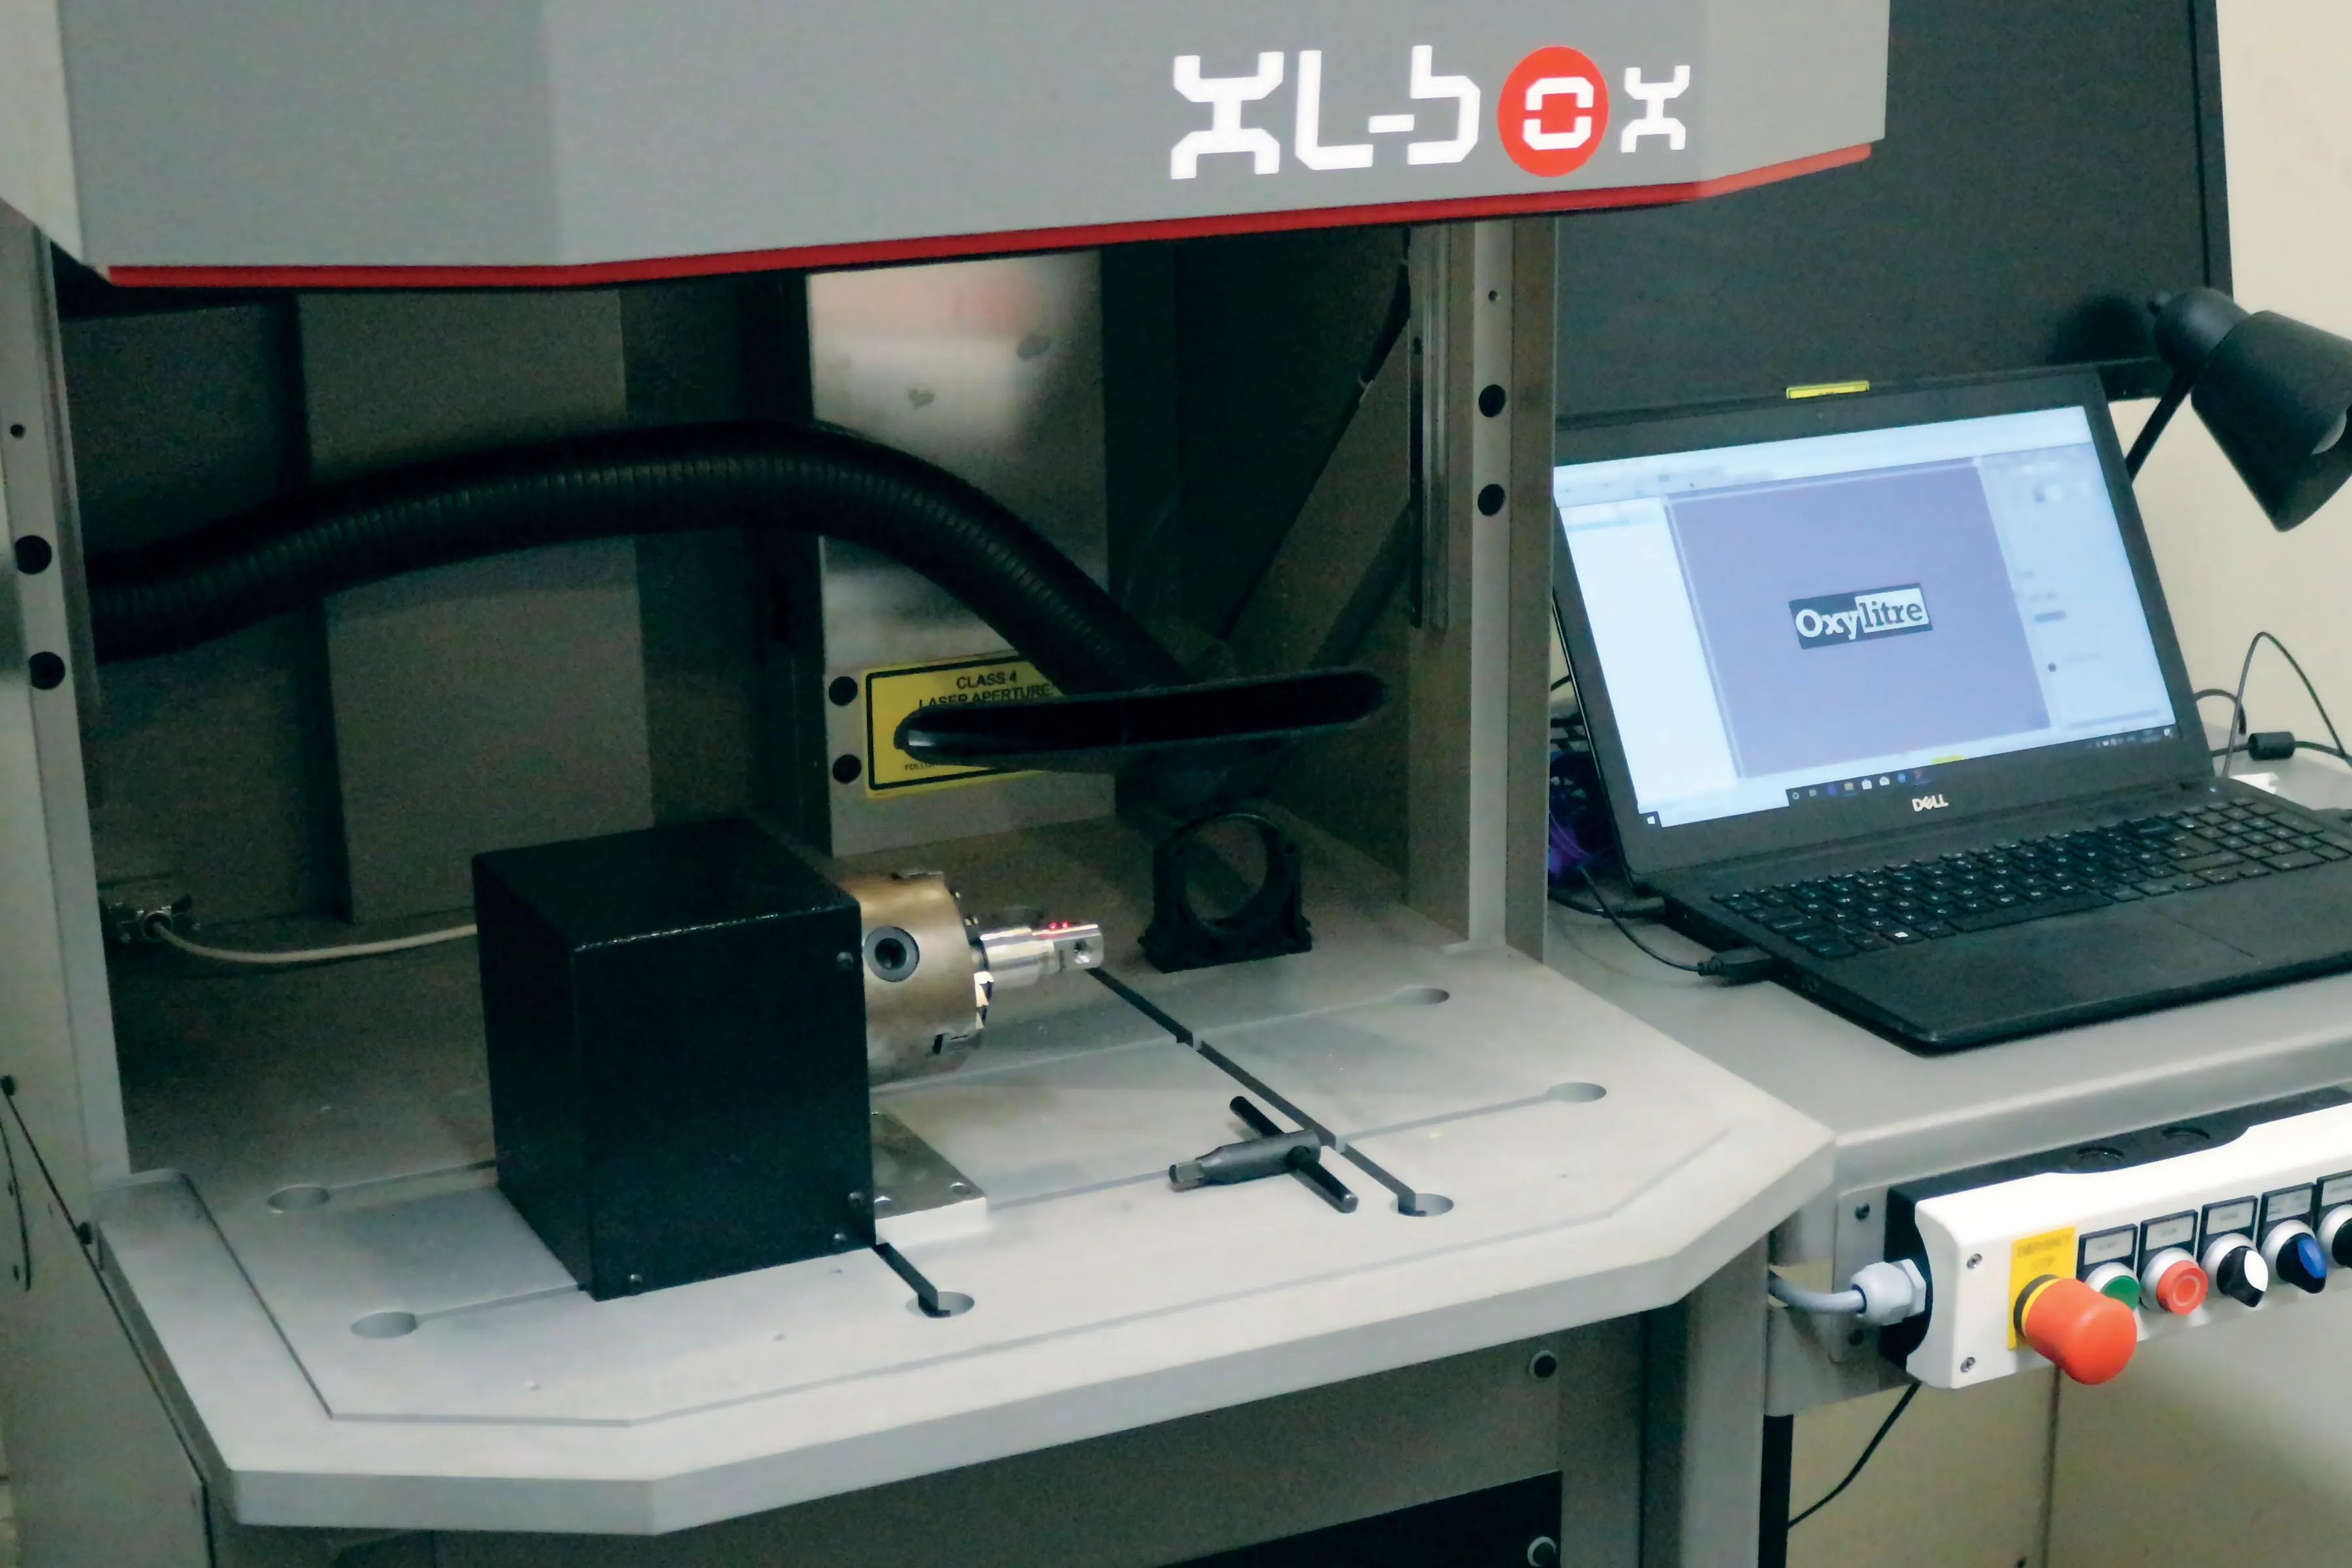 Oxylitre Technical laser marking system